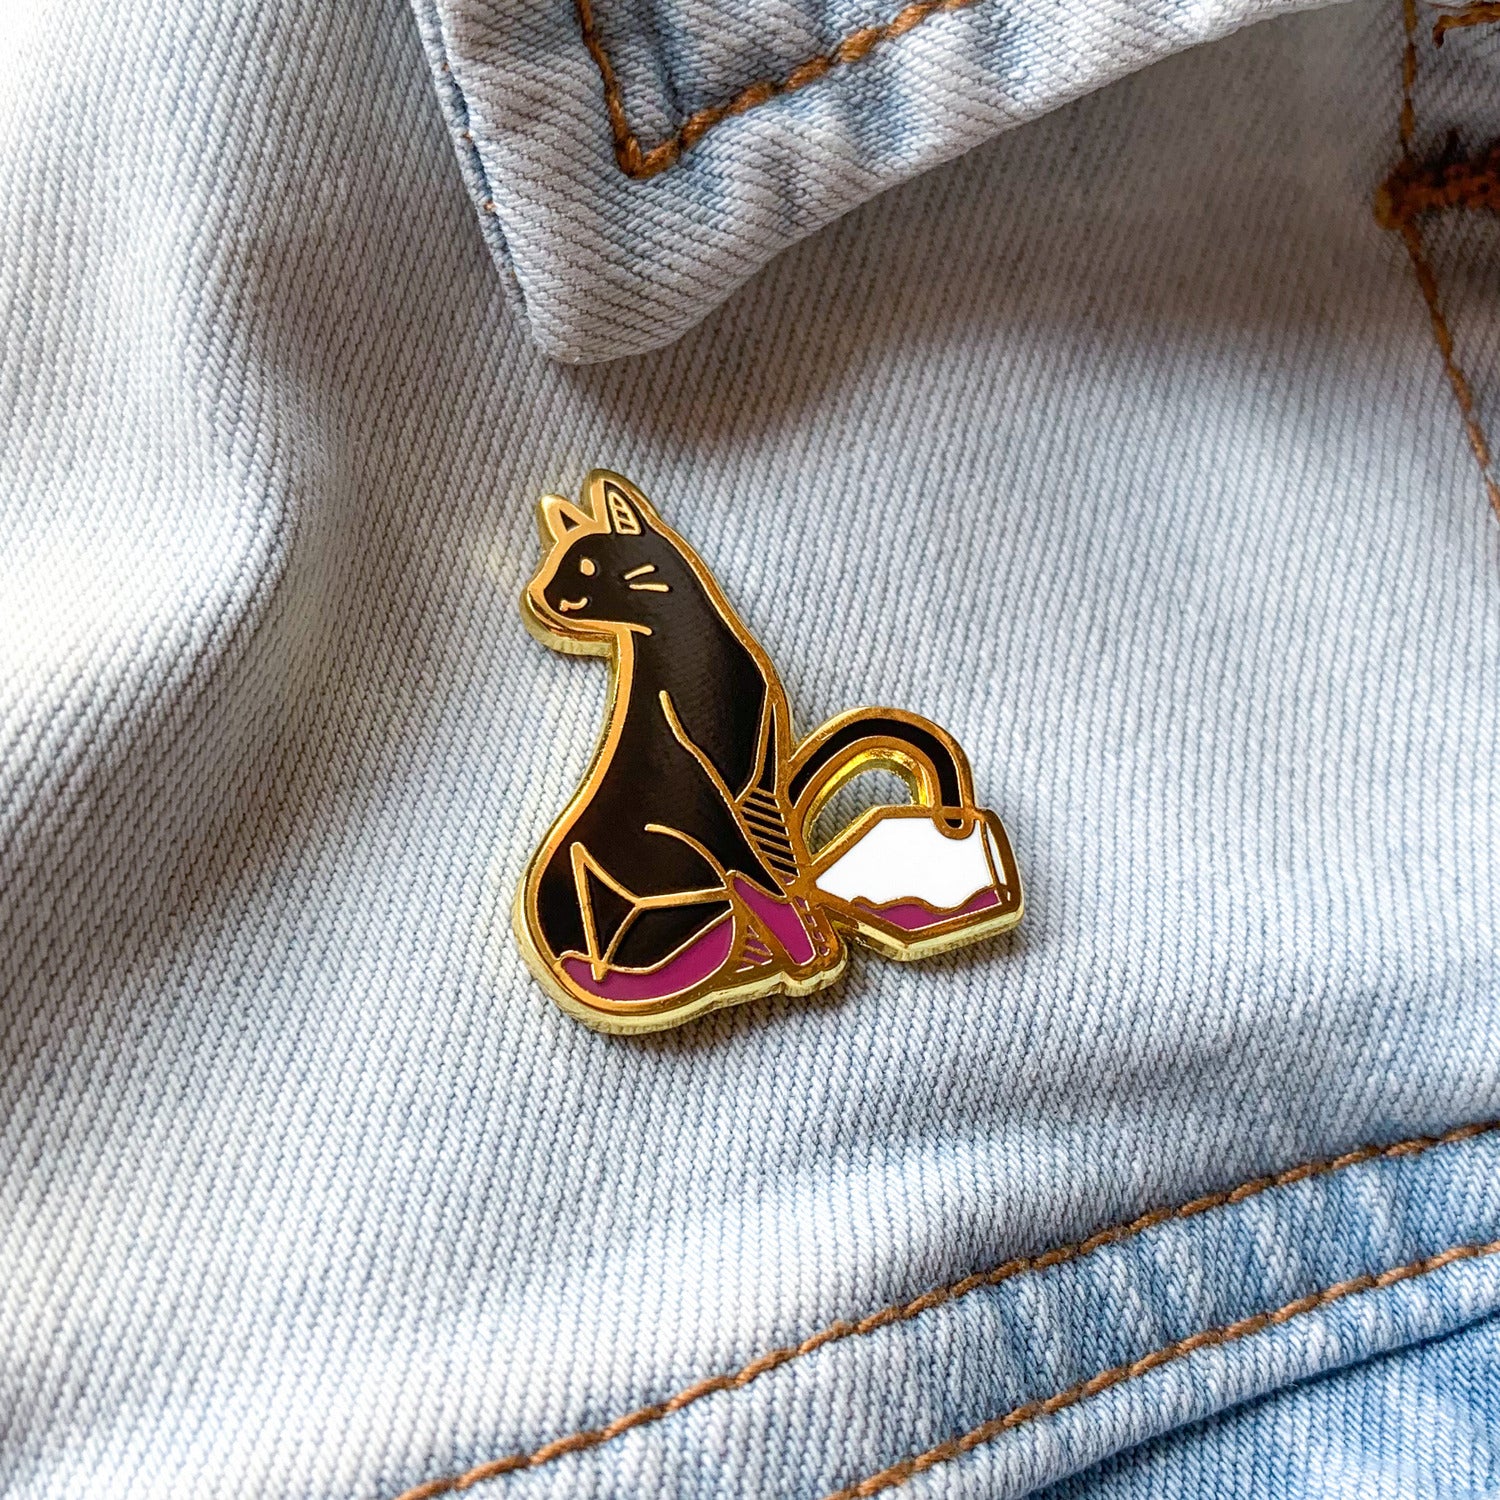 Cat and Merlot Wine Hard Enamel Pin by Cocktail Critters on Denim